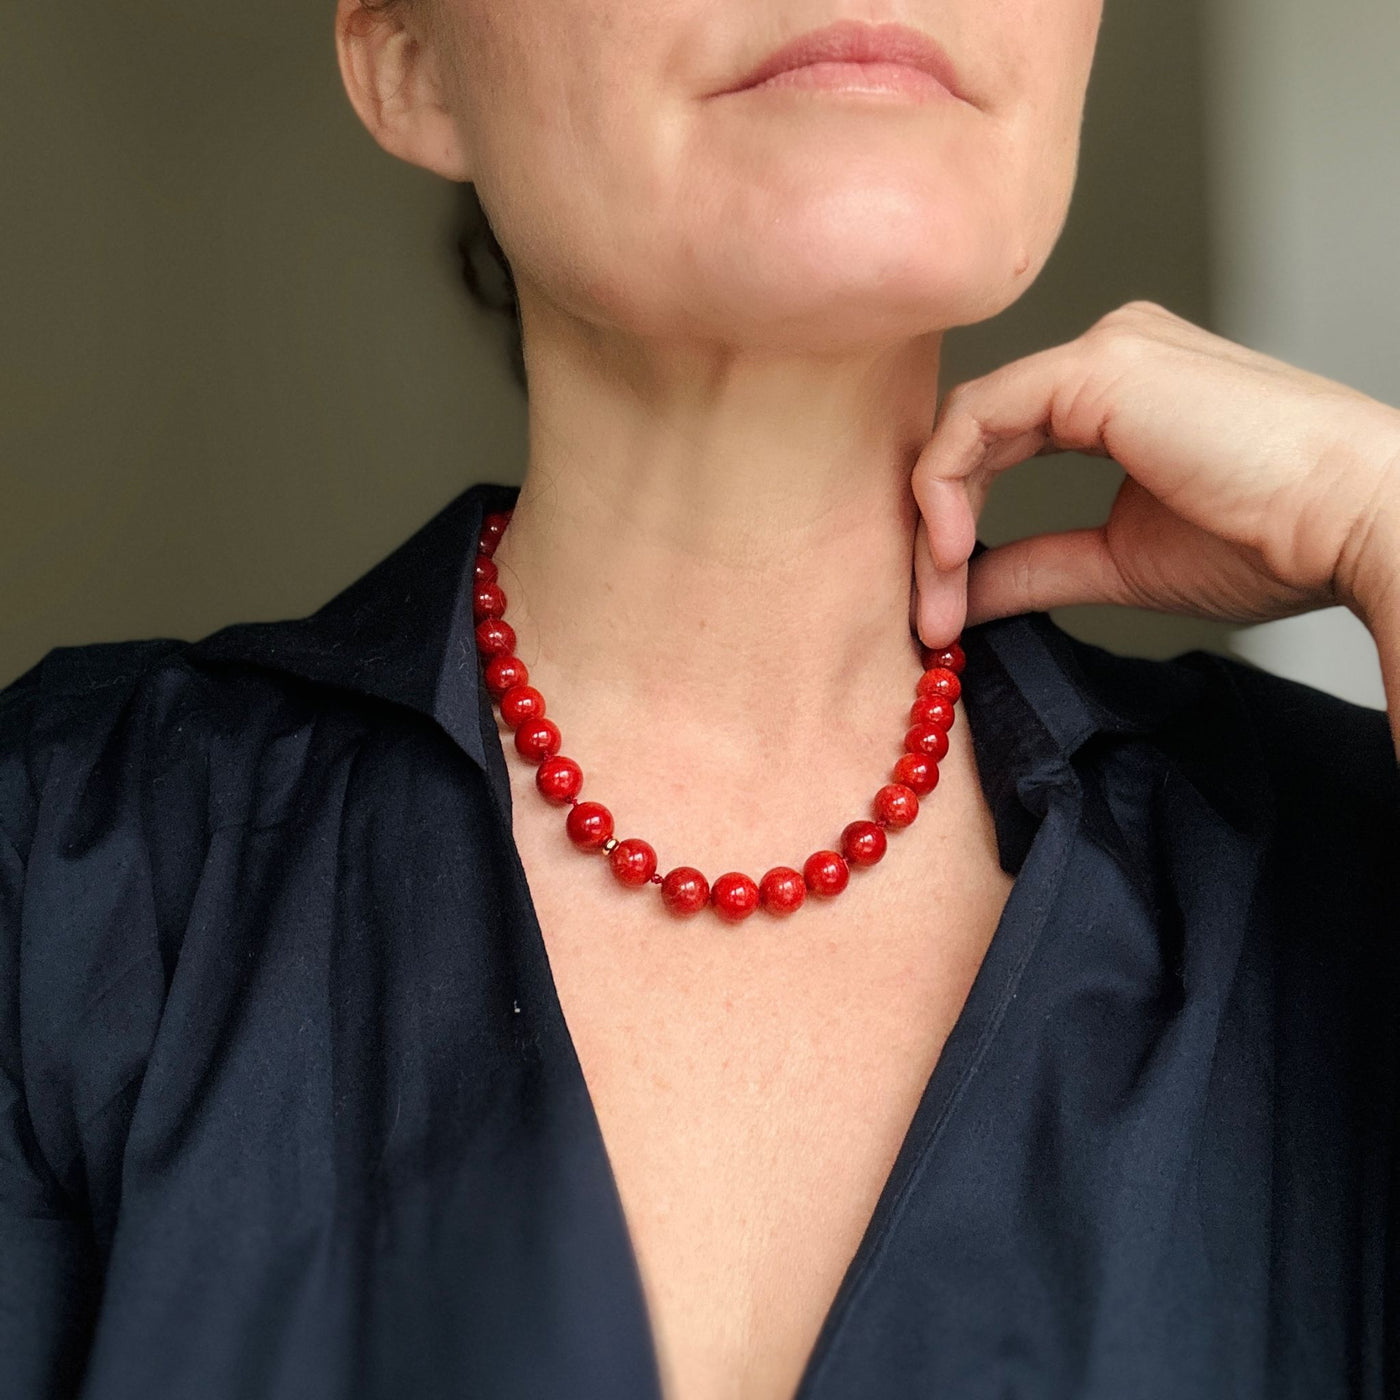 Womens Necklaces Jewelry Coral, Coral Fashion Necklaces